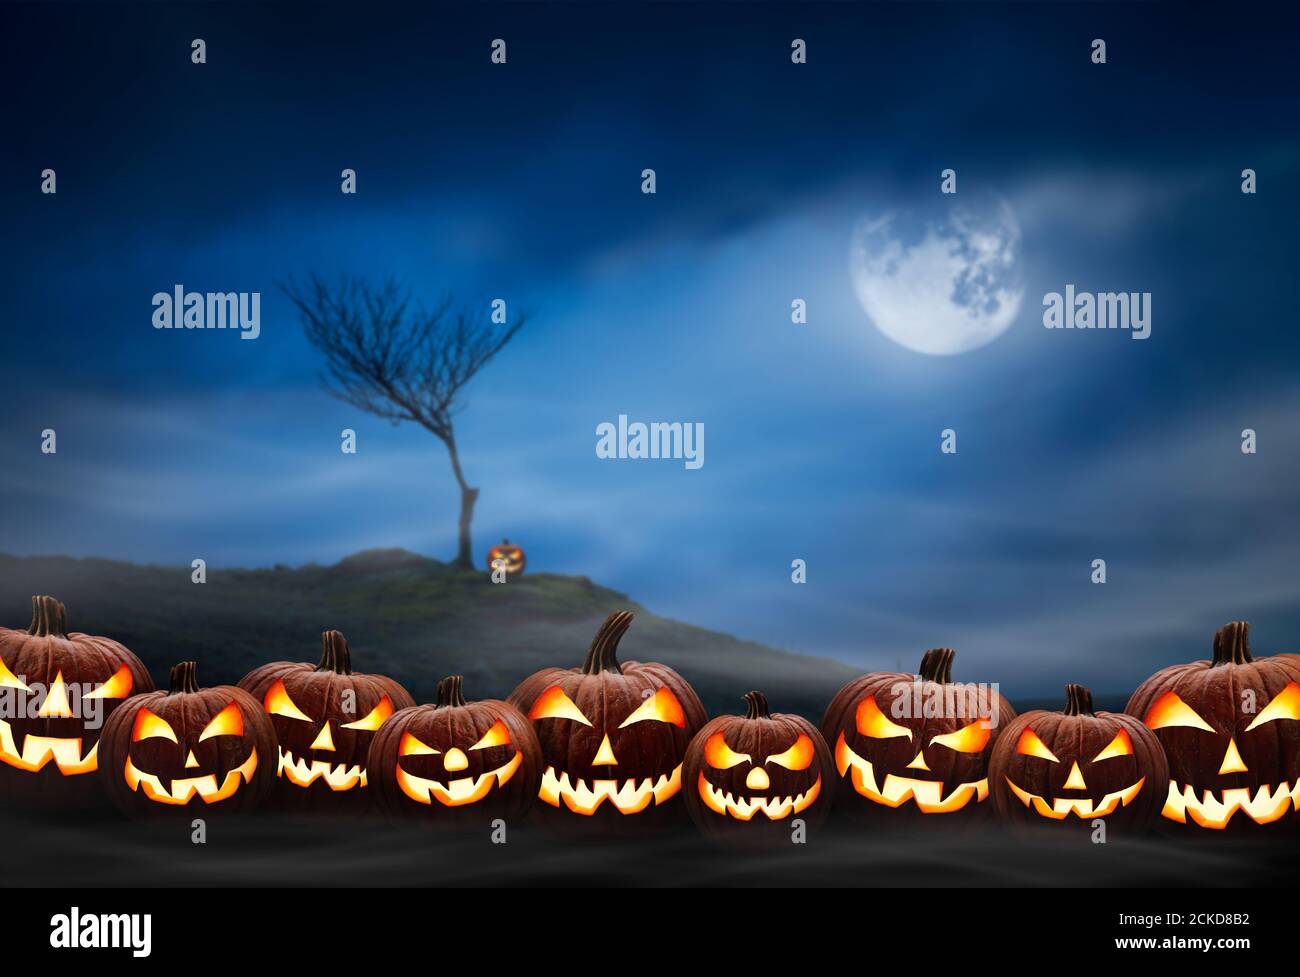 Lots of halloween lanterns with evil face and eyes, Jack O Lantern, against a spooky looking landscape background at night with a glowing full moon, l Stock Photo